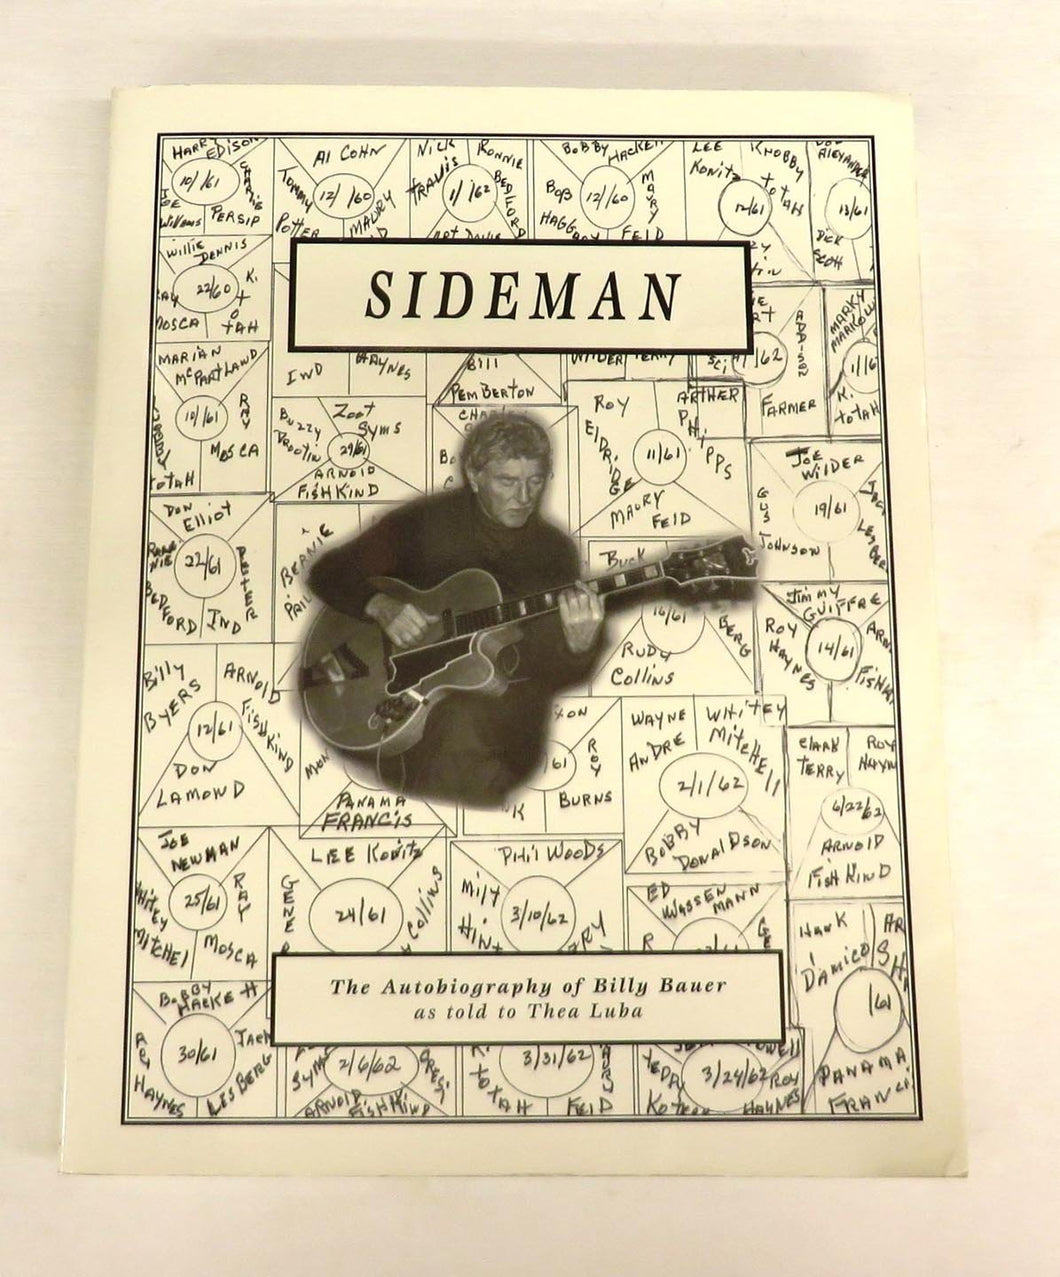 Sideman: The Autobiography of Billy Bauer as told to Thea Luba